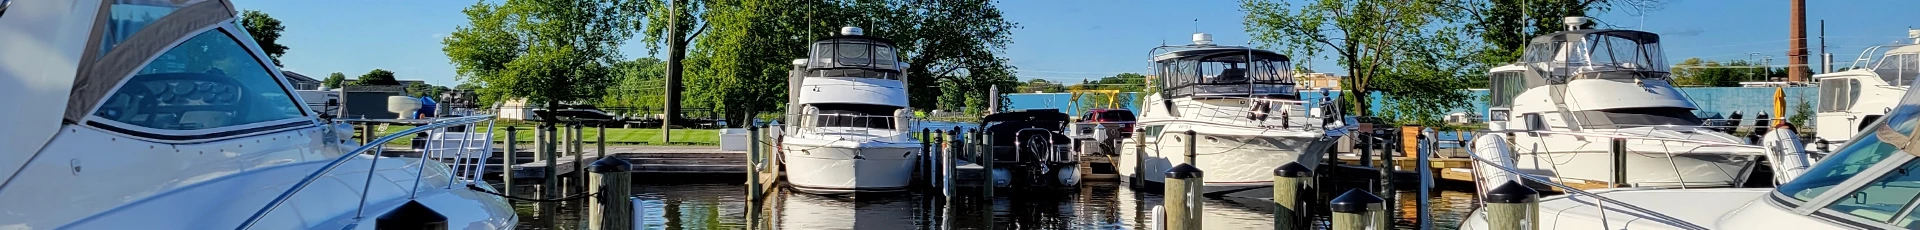 Boat Removal, Dismantle and Disposal in La Crosse Wisconsin